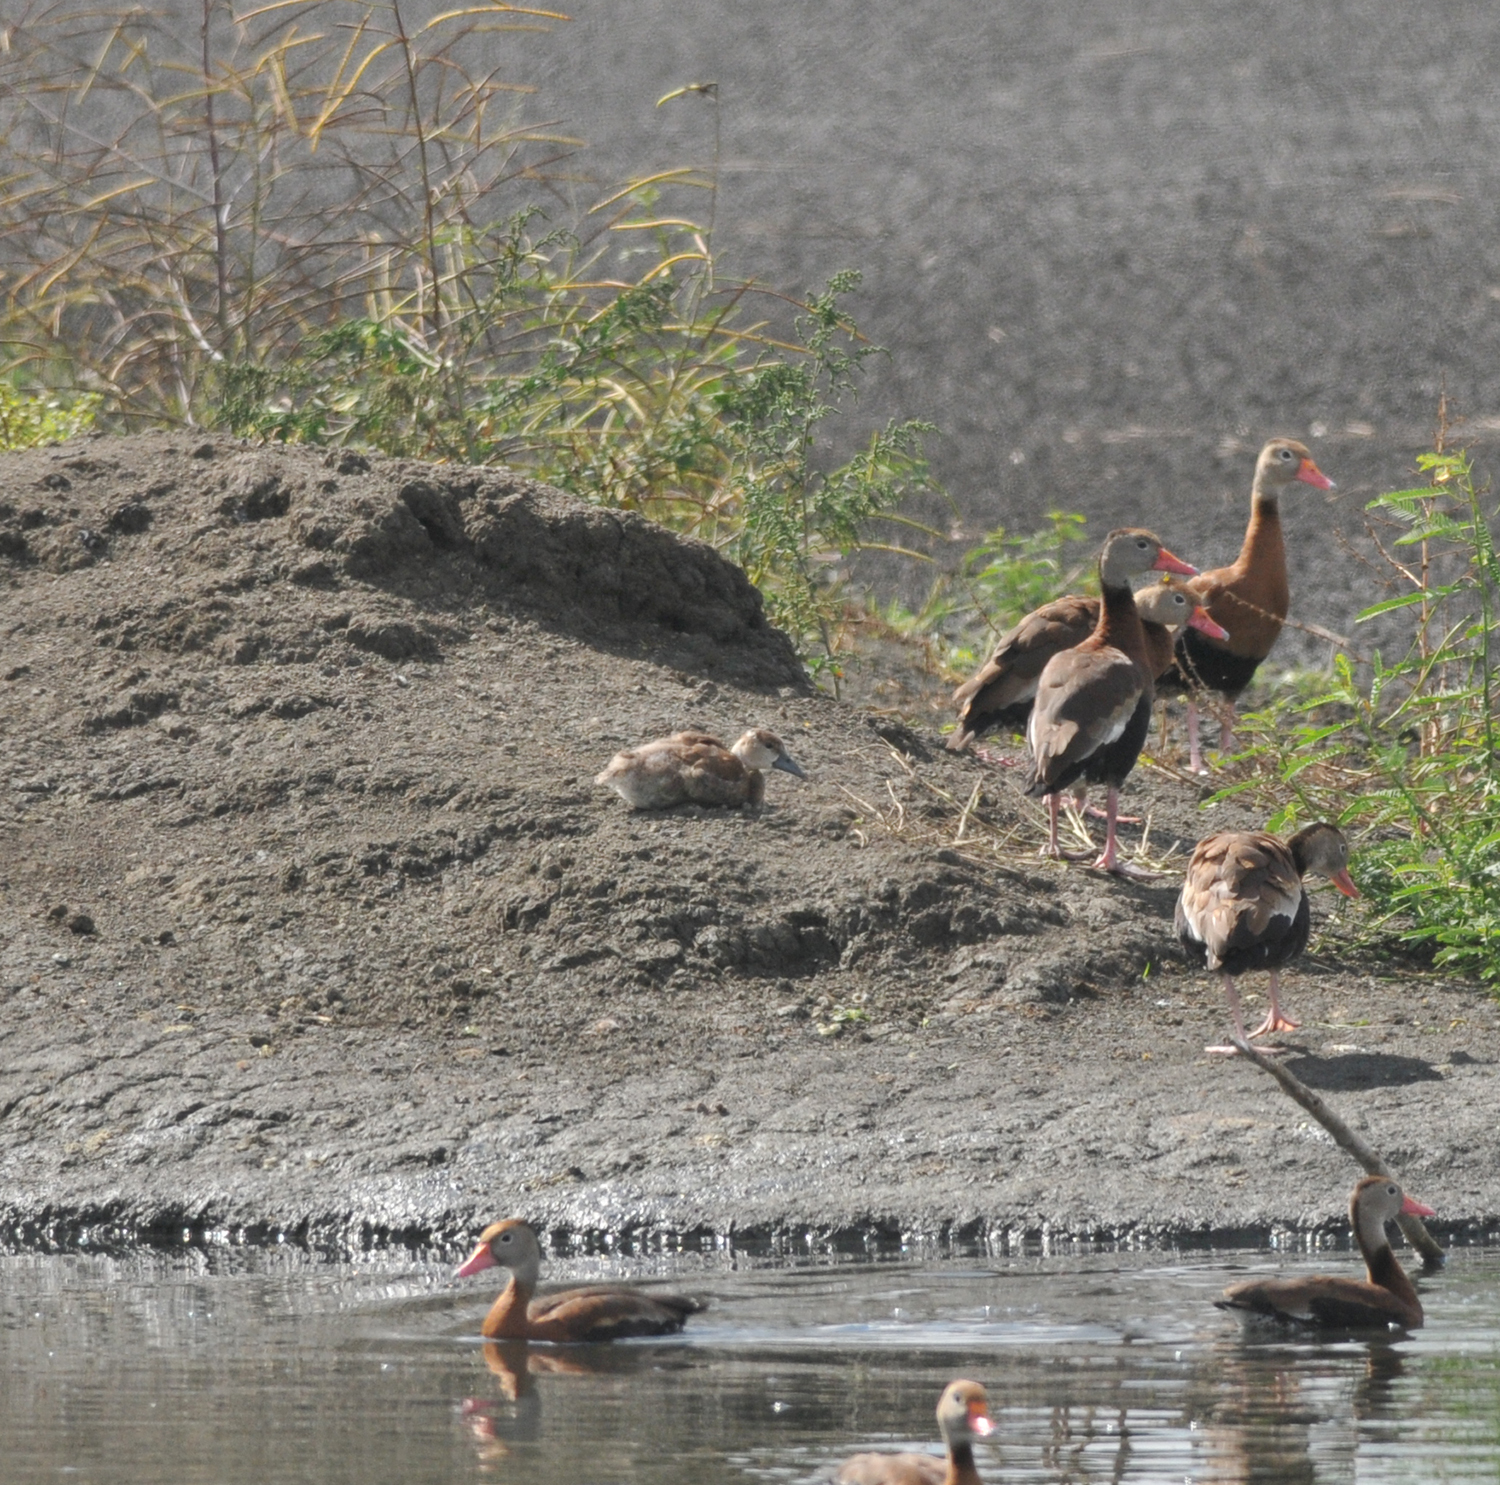 Black-bellied Whistling Duck duckling, Ensley, Shelby Co, TN, 17 Oct 13